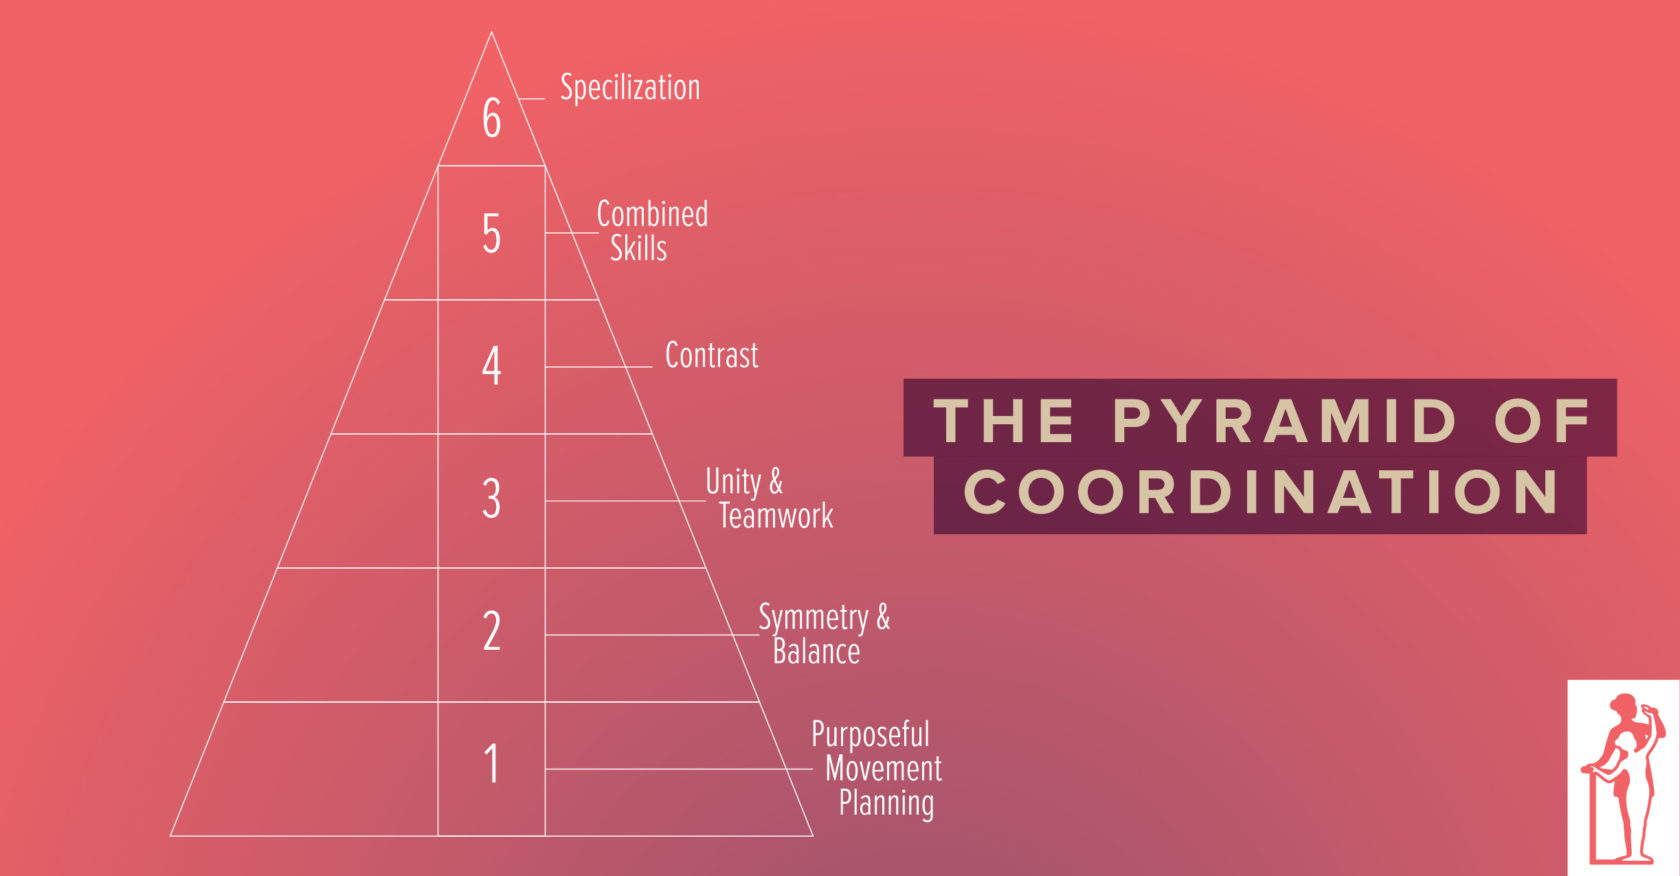 The Pyramid of Coordination